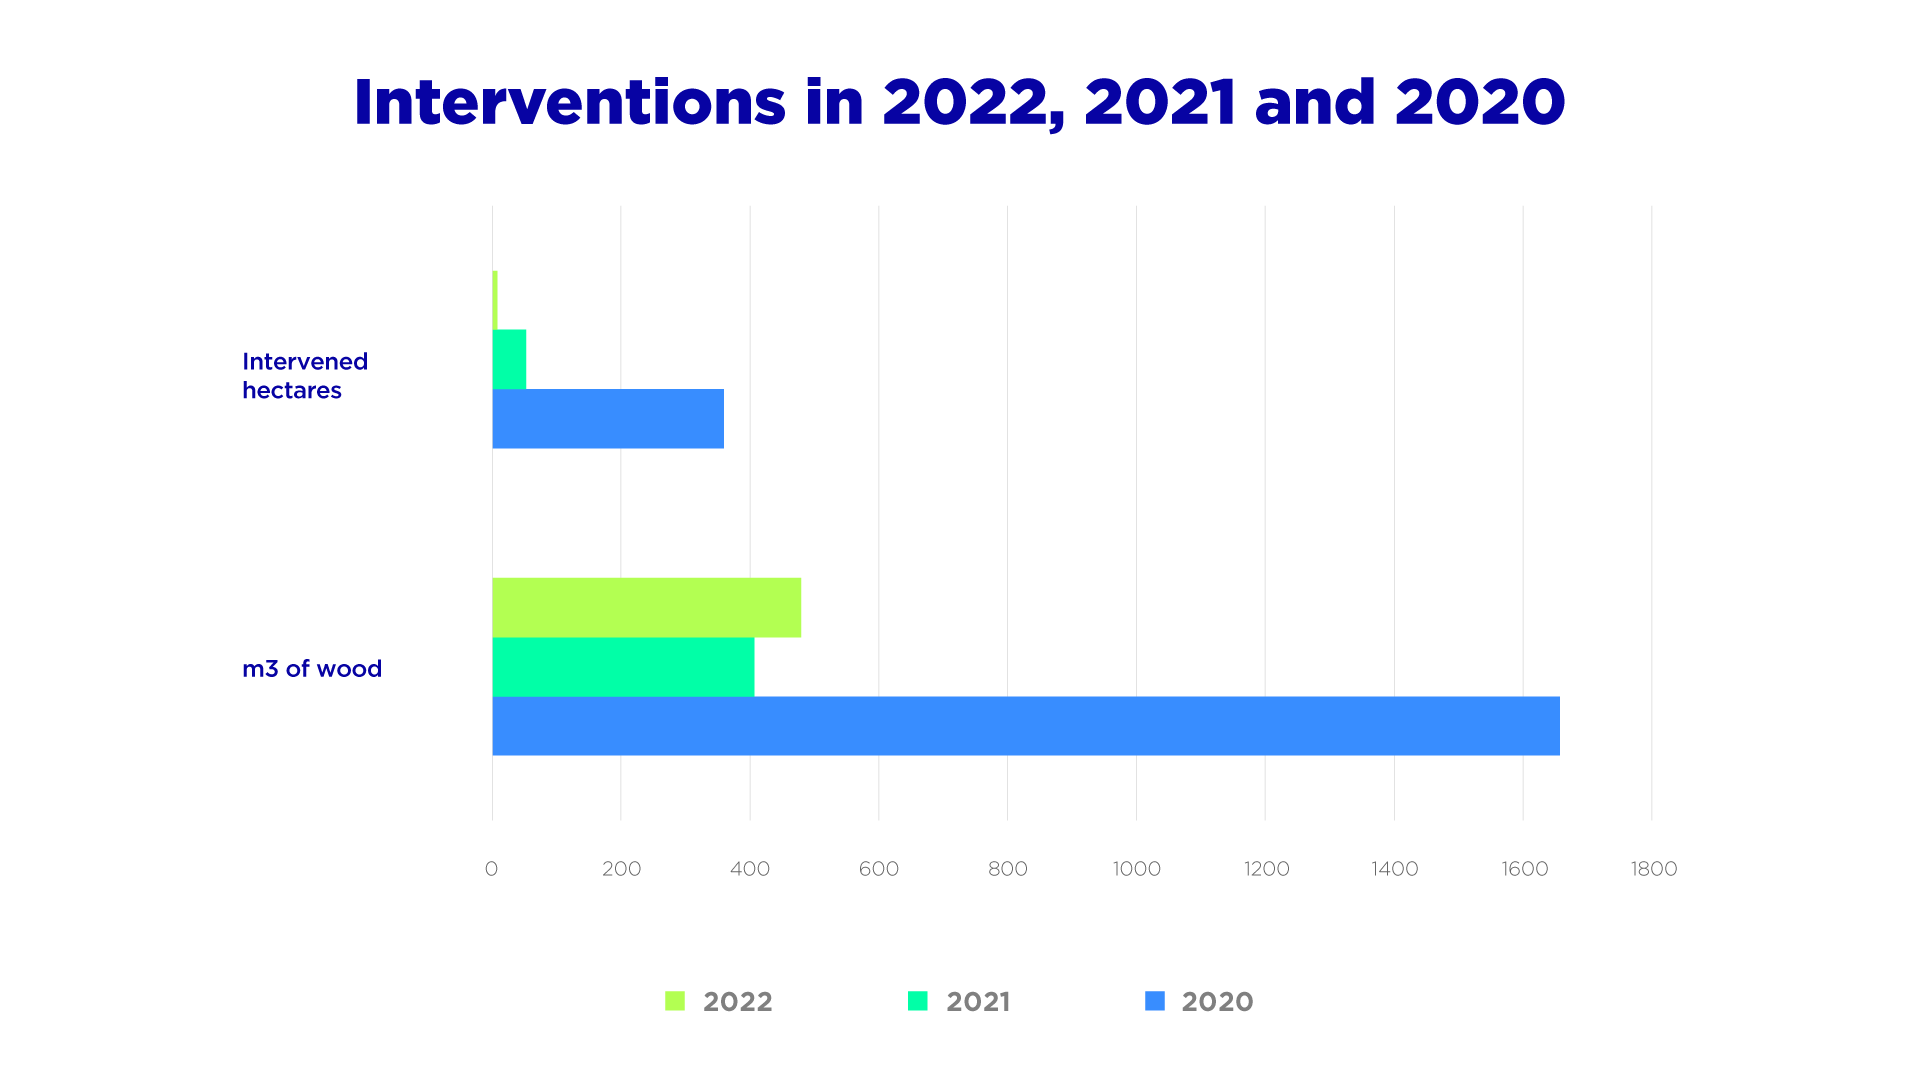 Interventions in 2022, 2021 and 2020